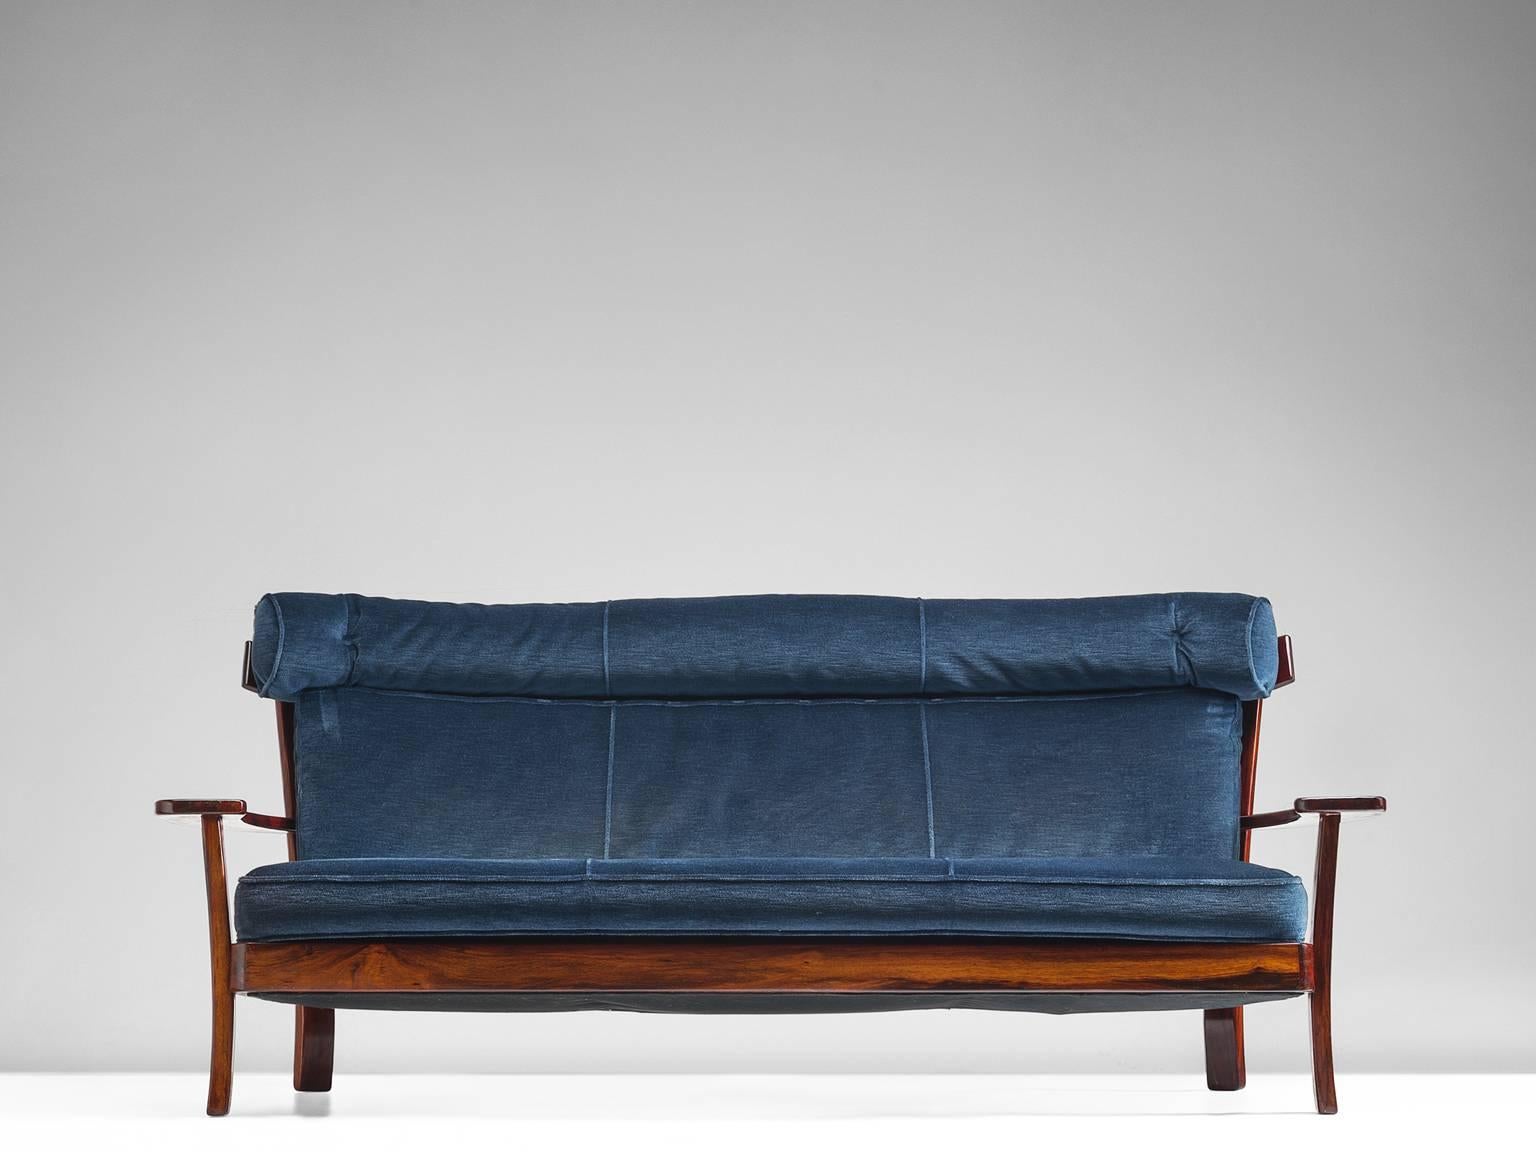 South American Brazilian Rosewood Sofa with Navy Velvet Upholstery